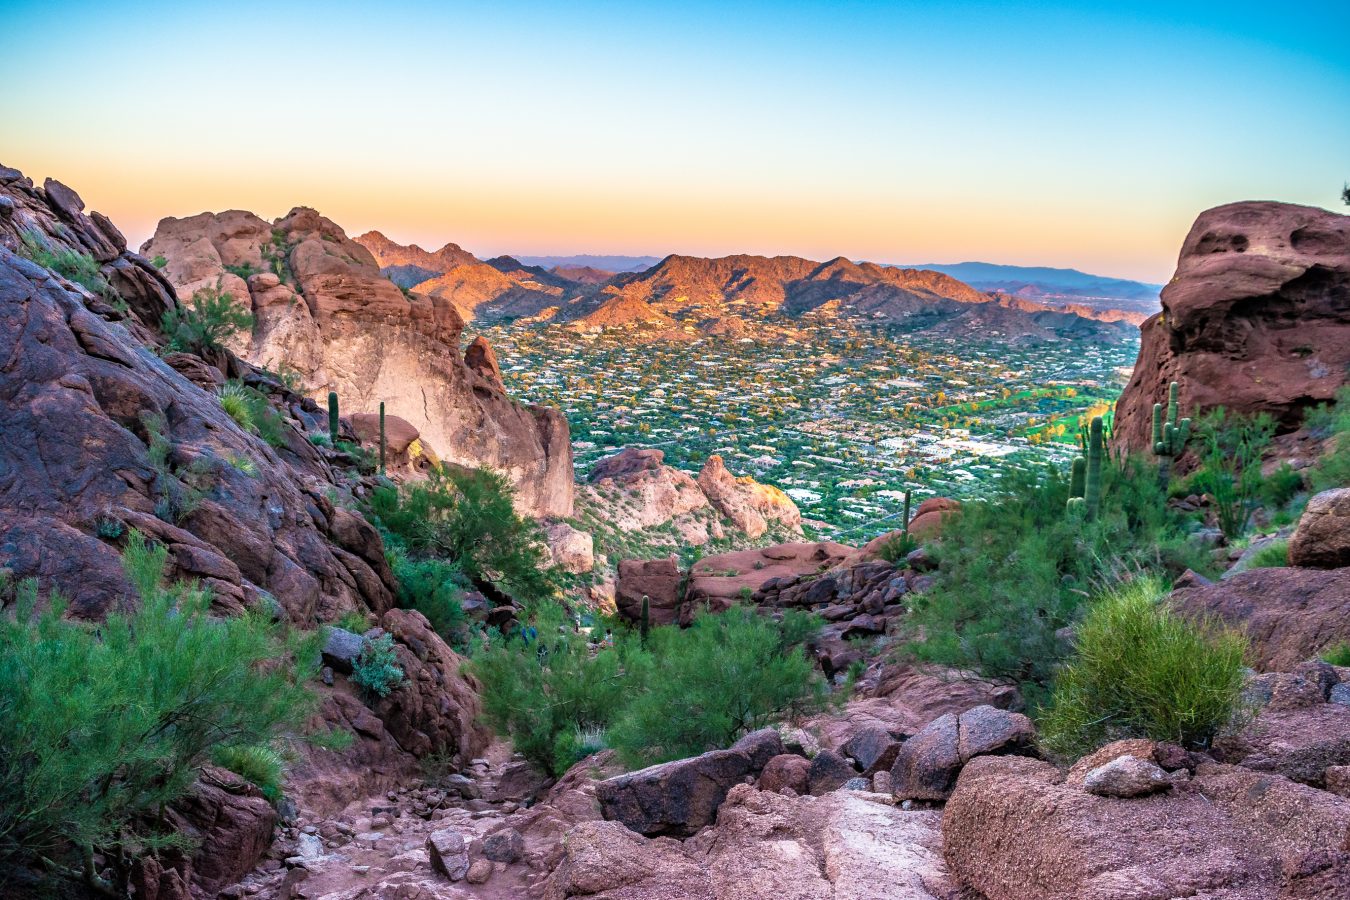 Phoenix is one of the cheapest summer destinations for 2023. Mountains and desert foliage in the foreground is neighborhood streets in the valley below.
